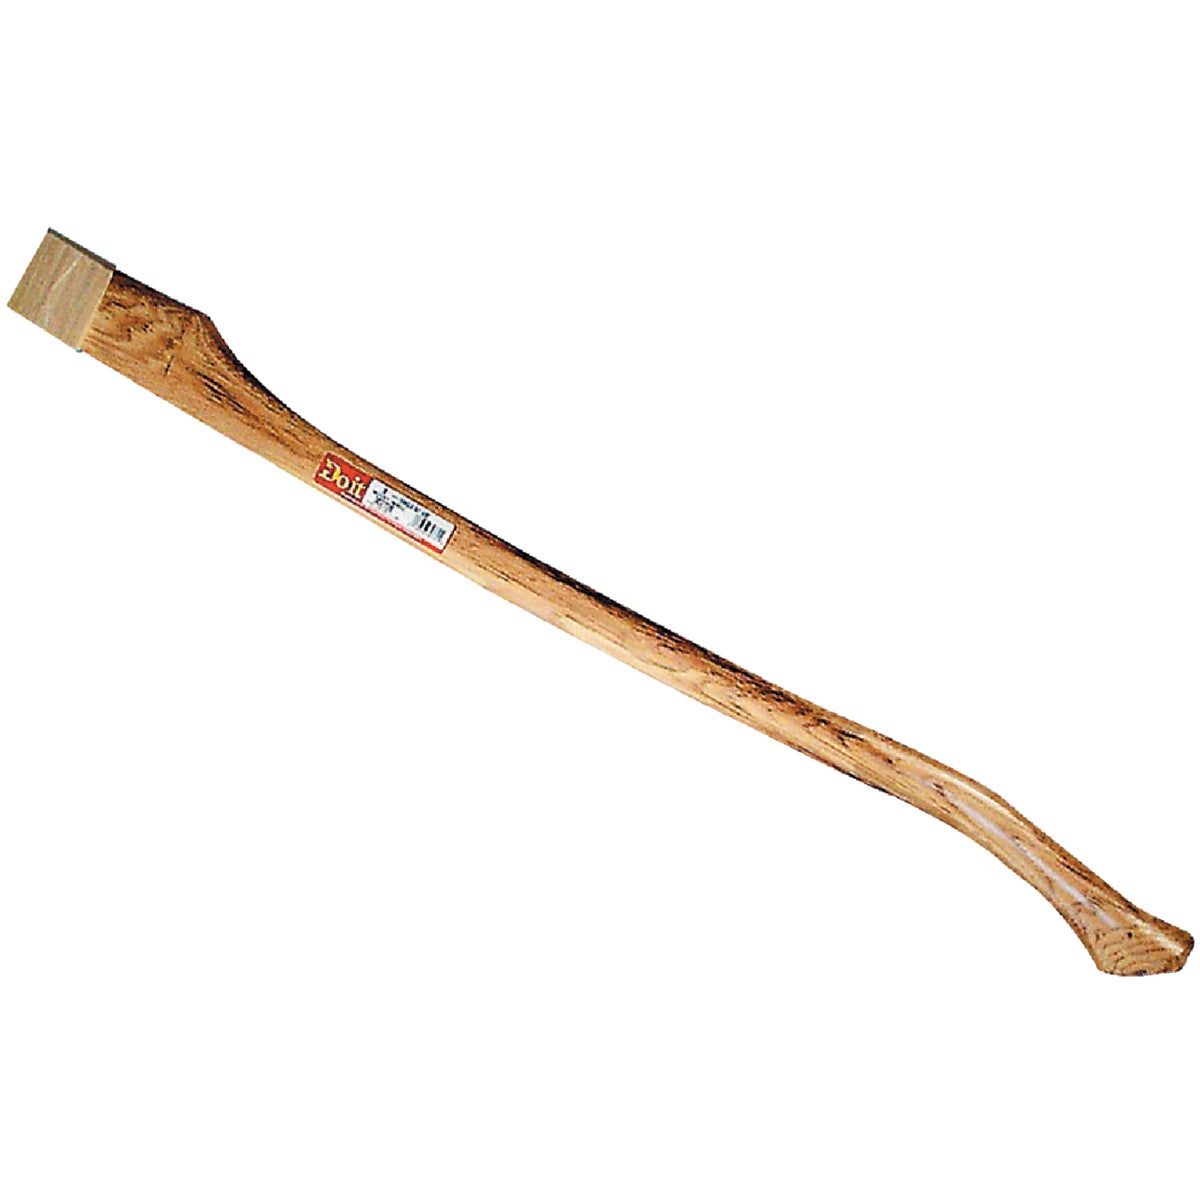 Item 302728, 36 In. single bit axe handle. Bent style for use on 3 to 5-pound axes.